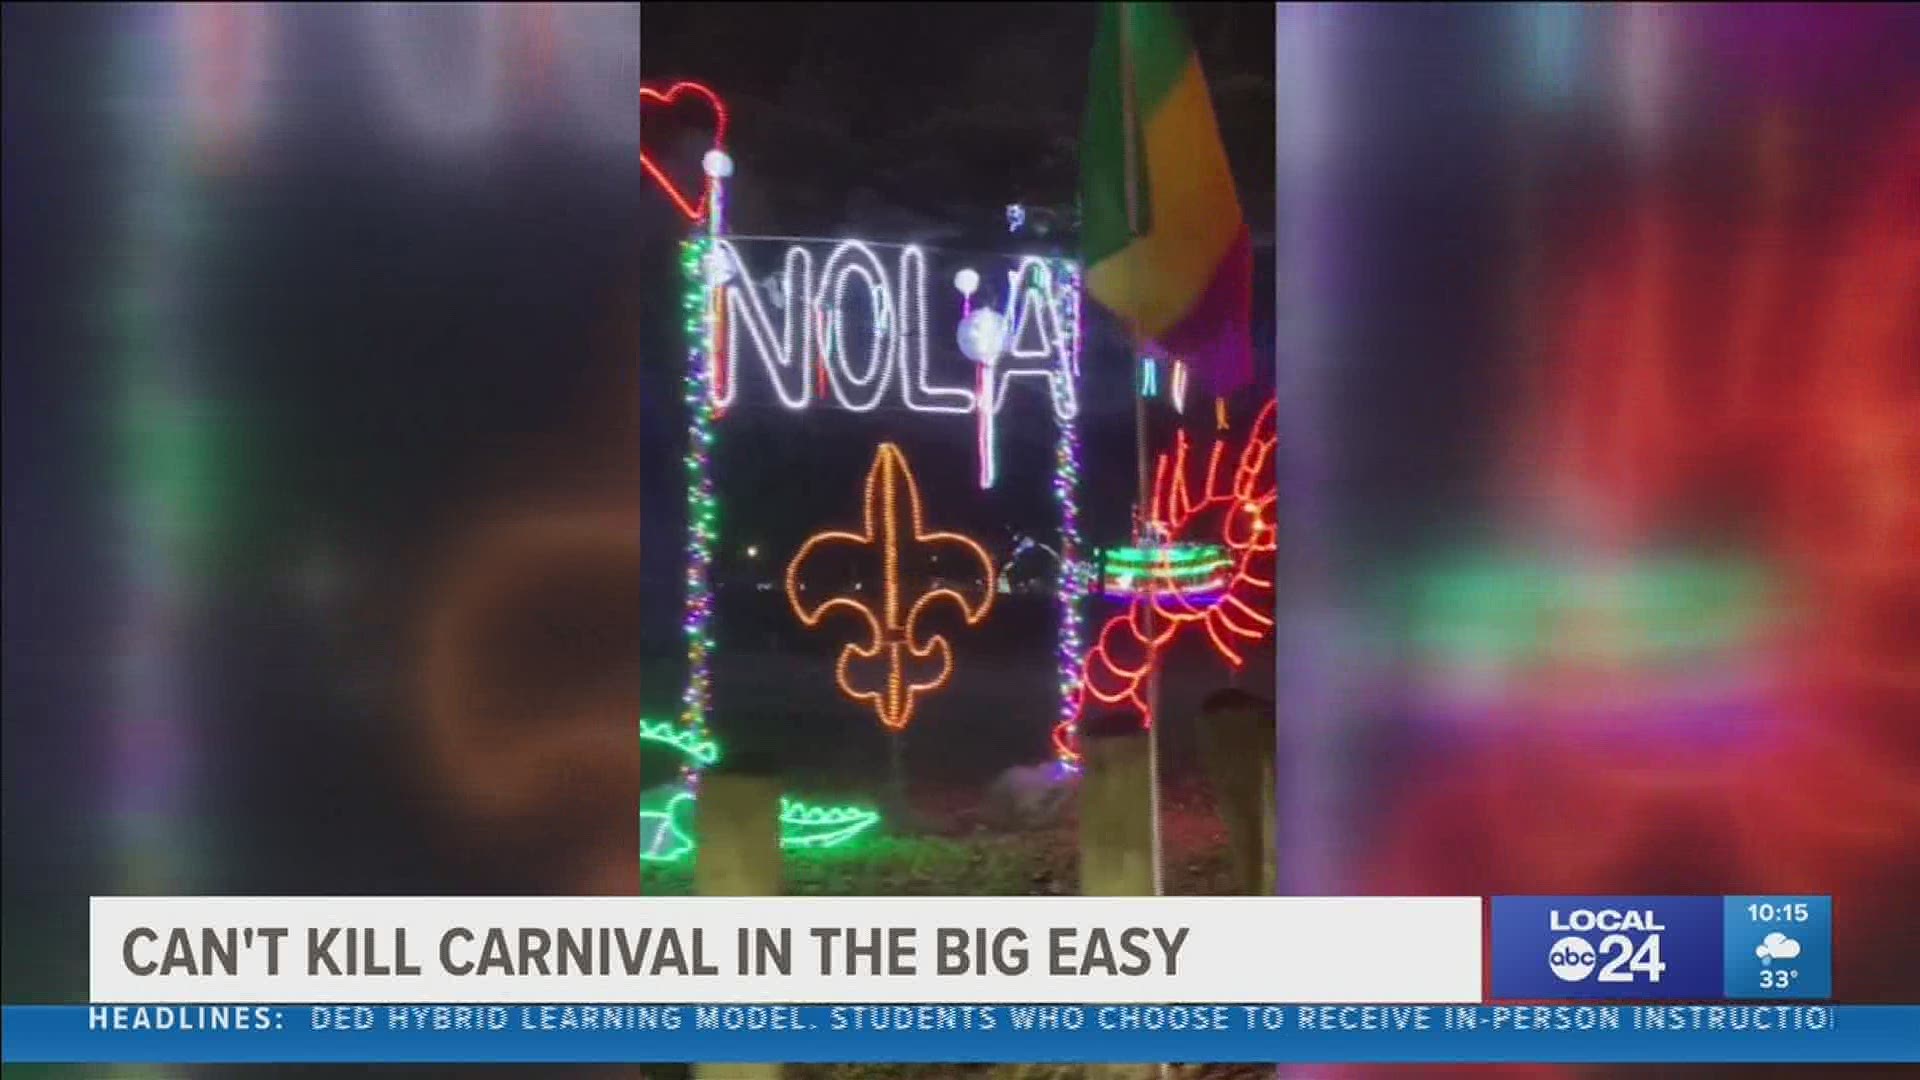 Parades may not be rolling this Carnival season, but floats still bring joy for Mardi Gras lovers.